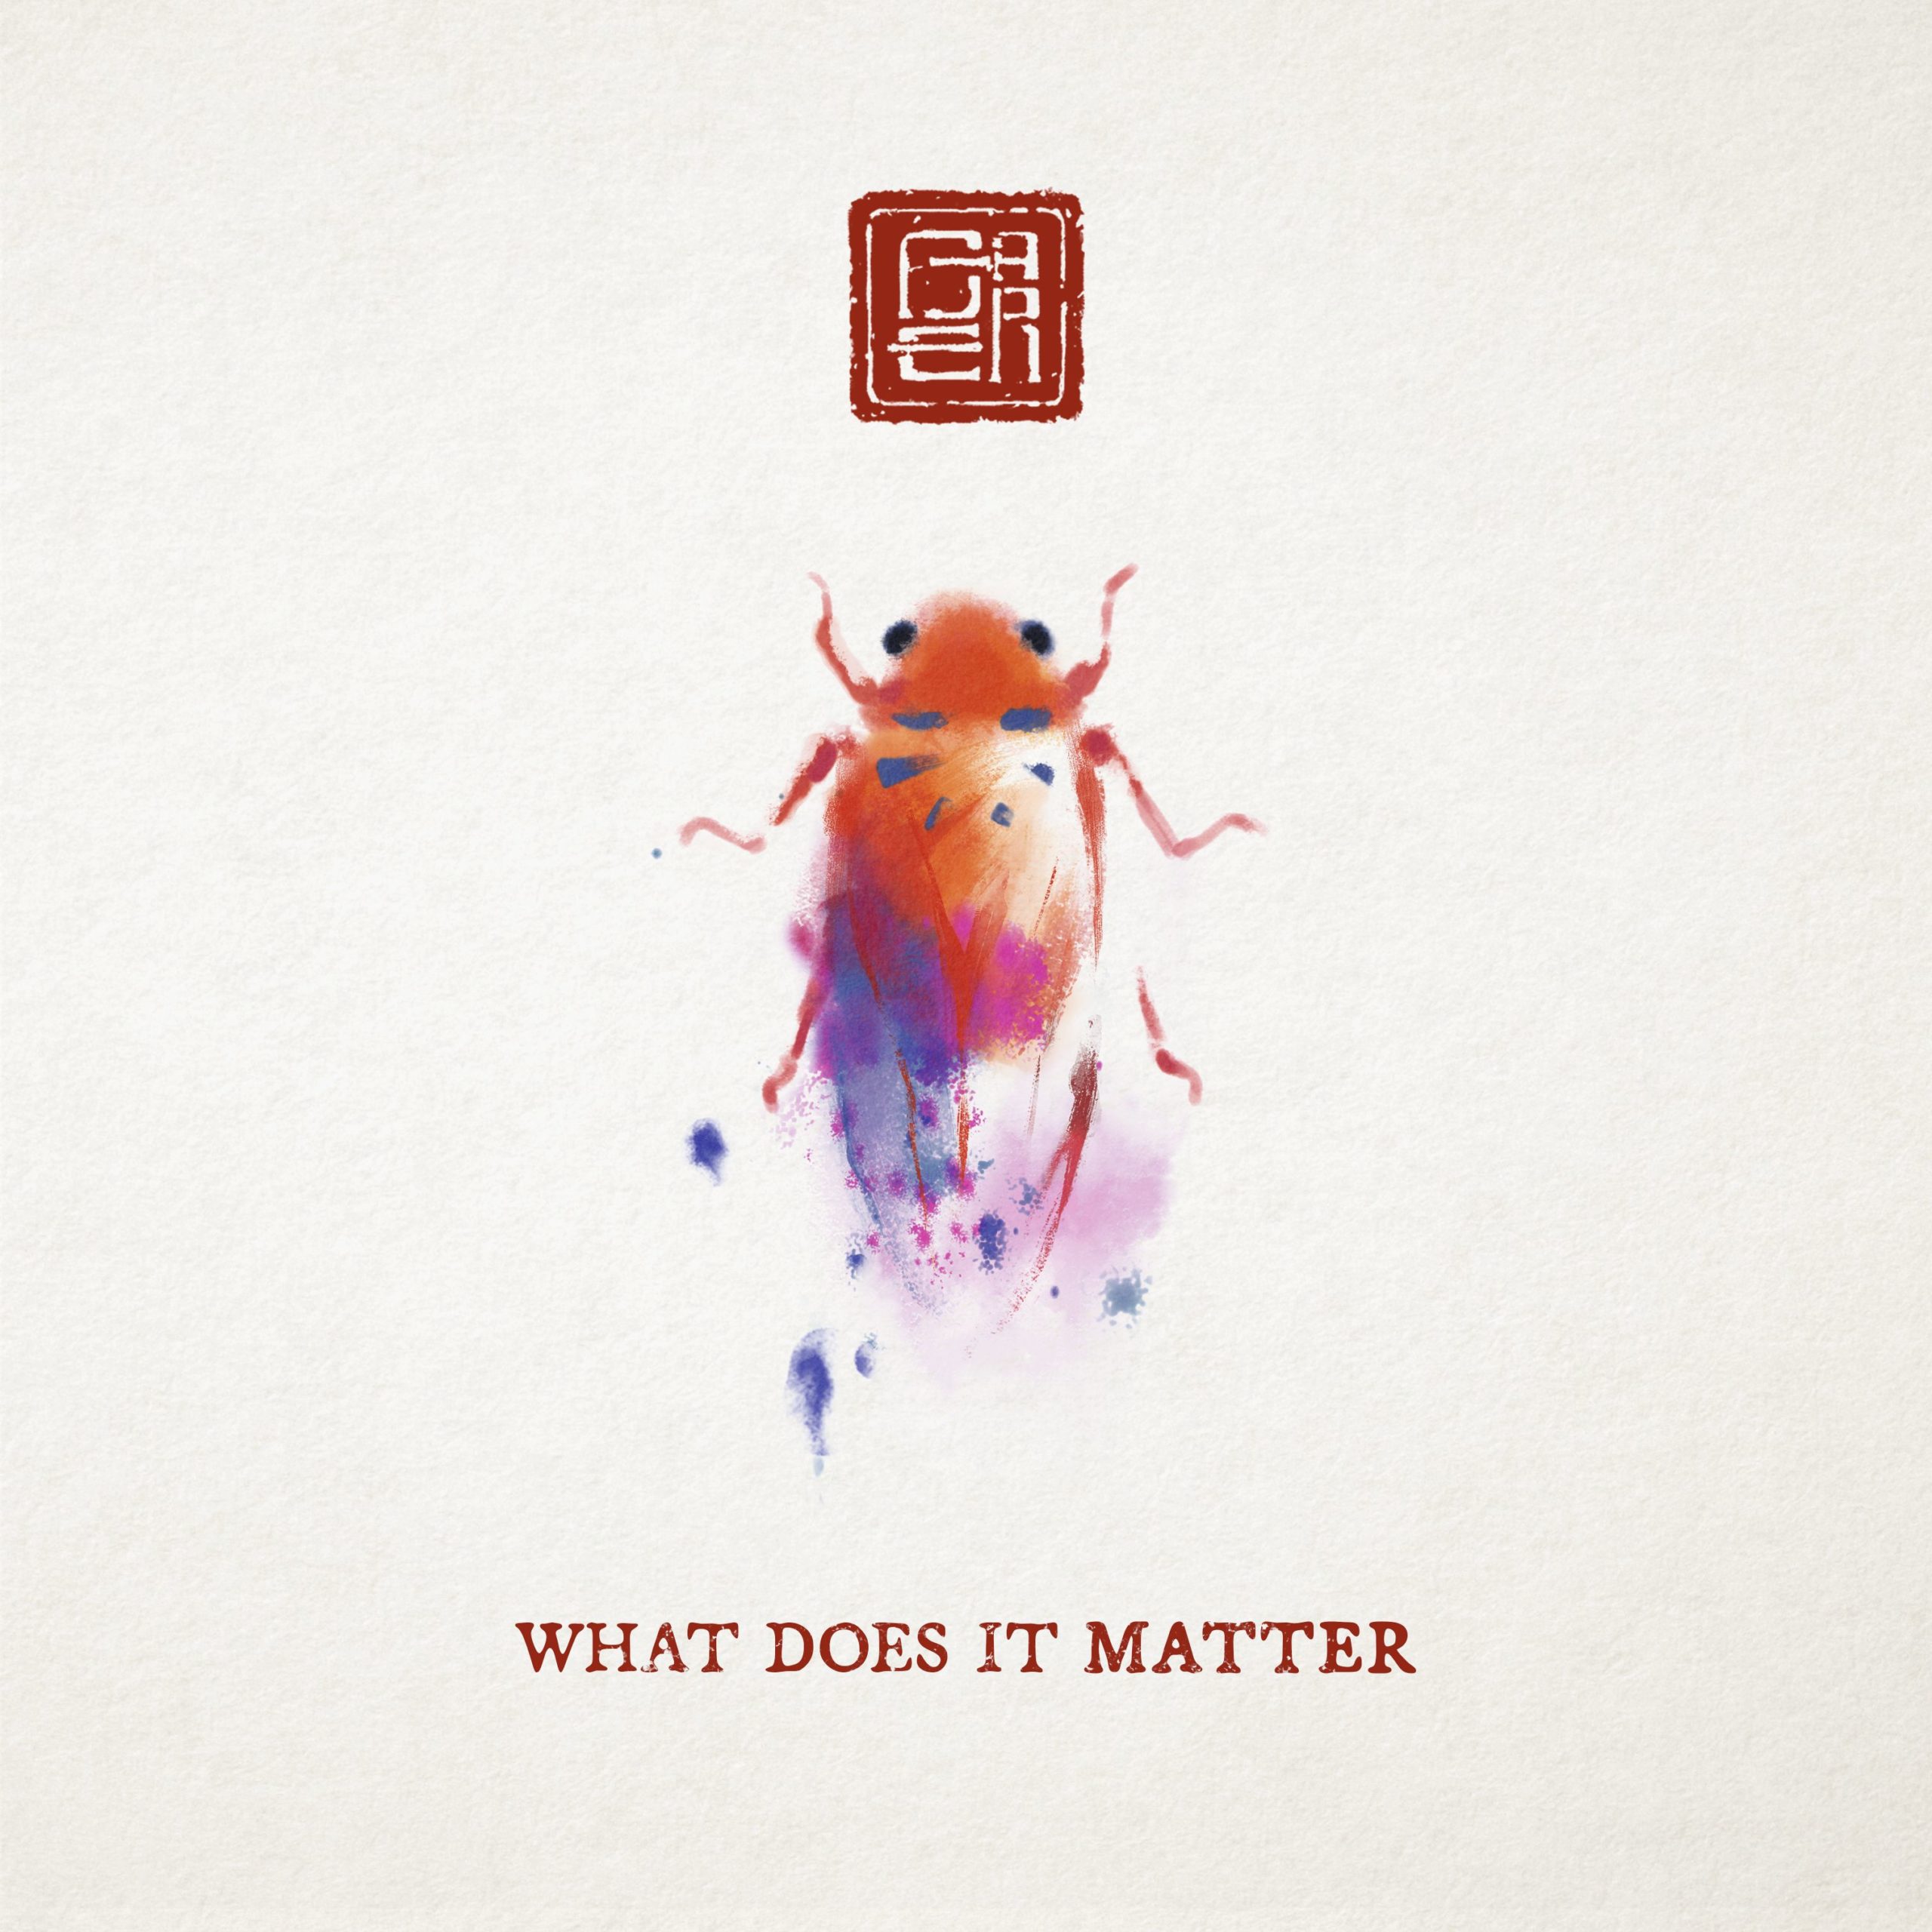 BAER – “What Does It Matter”